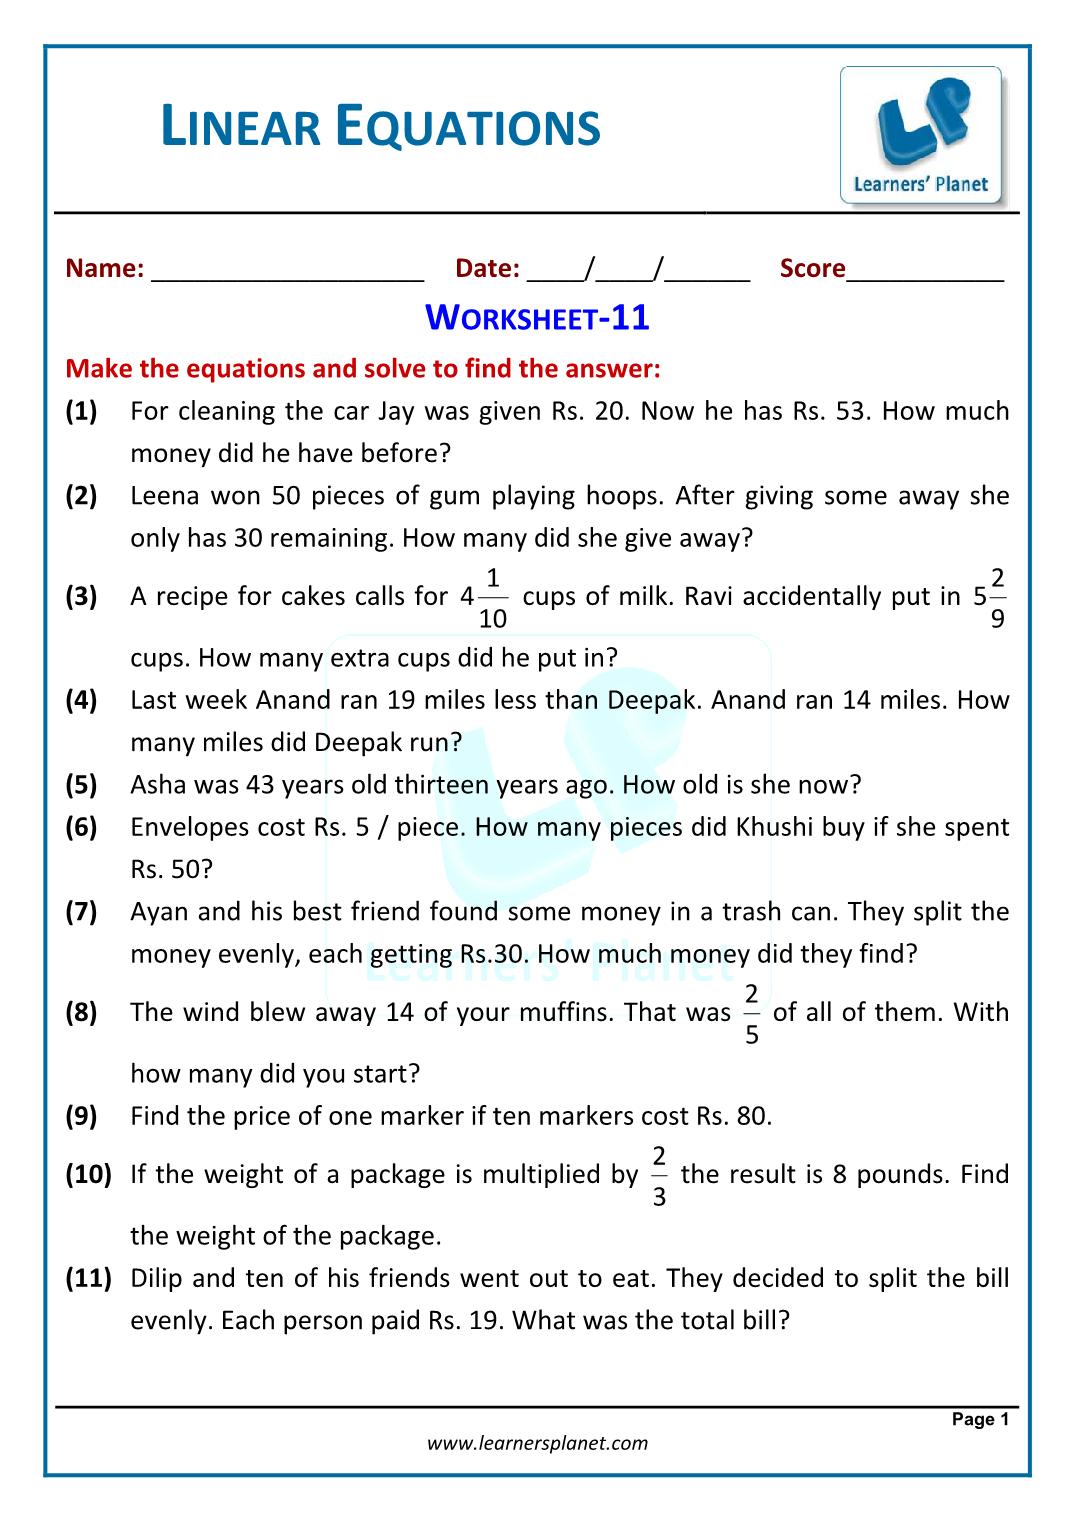 Linear Equations in One Variable Inside Linear Word Problems Worksheet